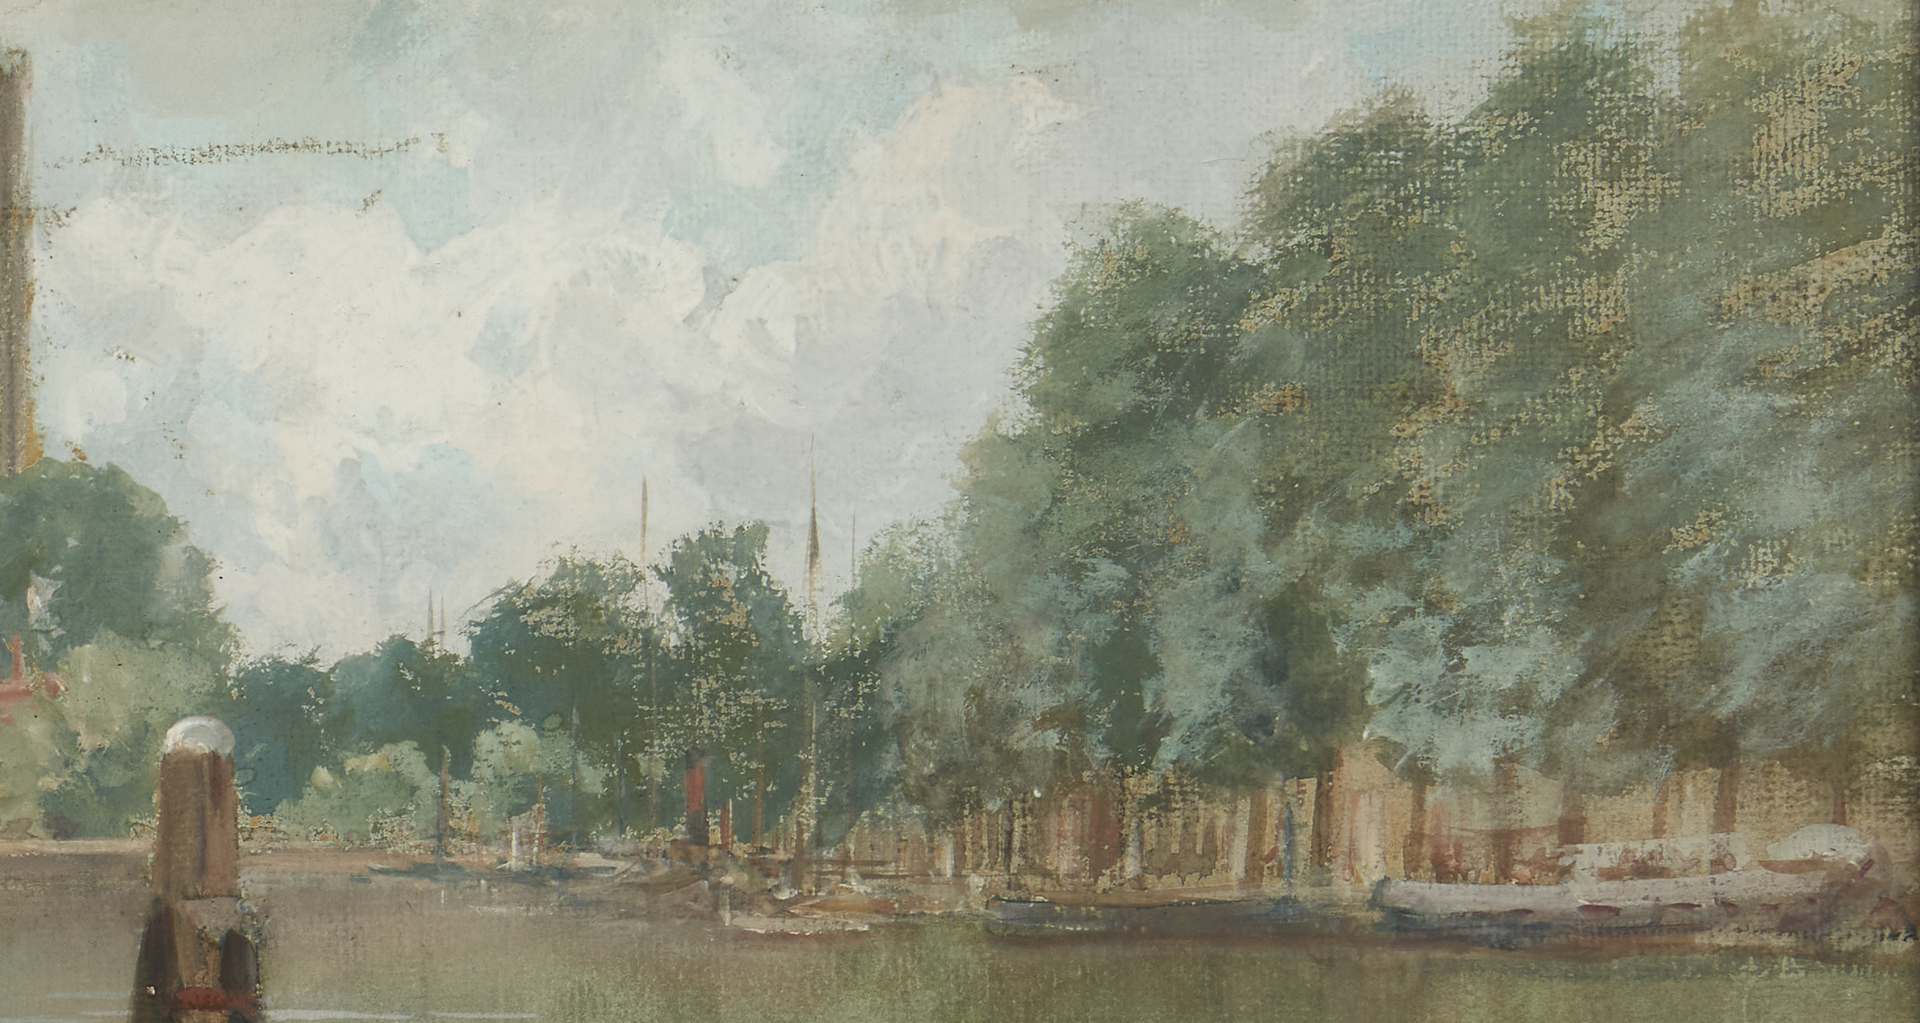 Lot 130: Francis Hopkinson Smith Canal Scene, Bruges